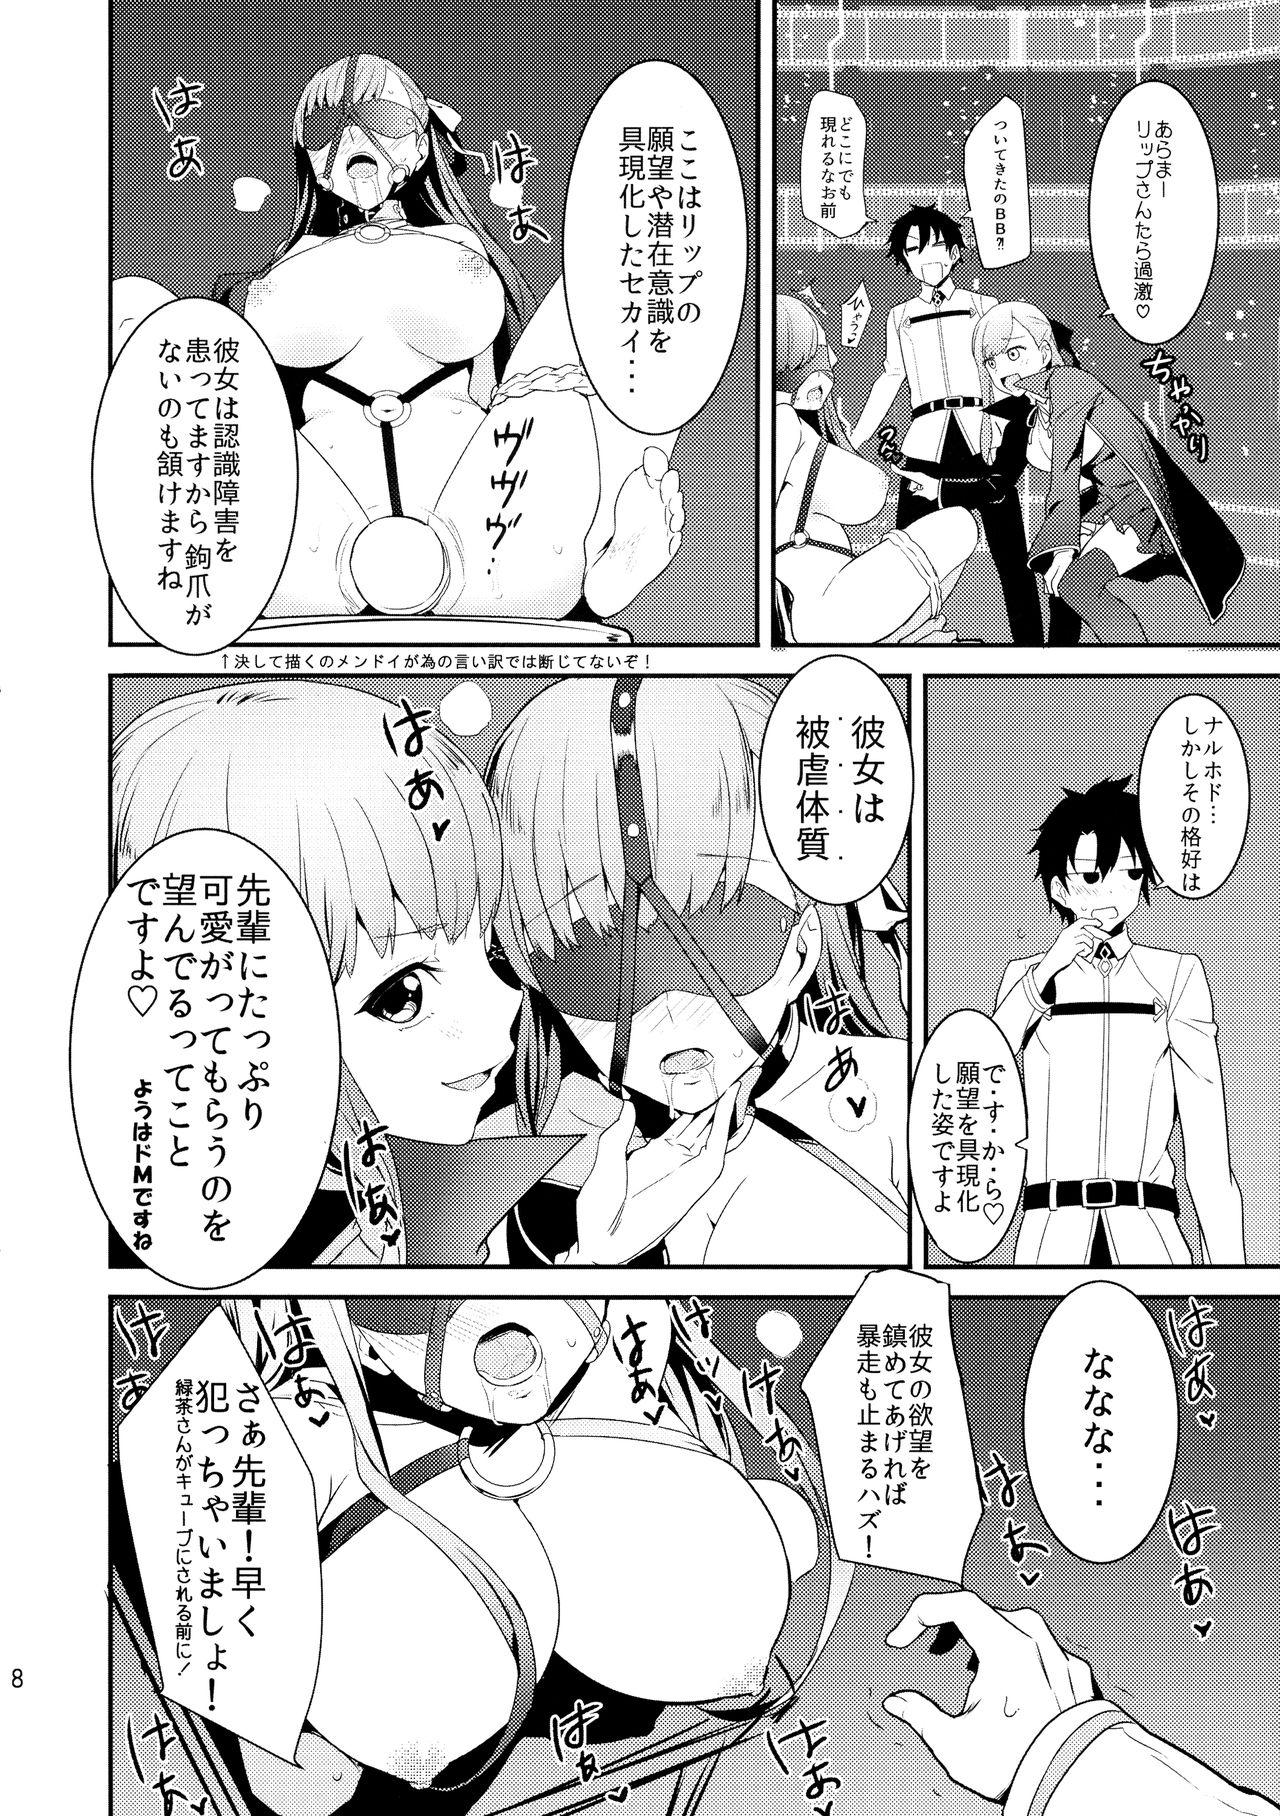 Students In the Passion, Melty heart. 1 - Fate grand order Leggings - Page 10